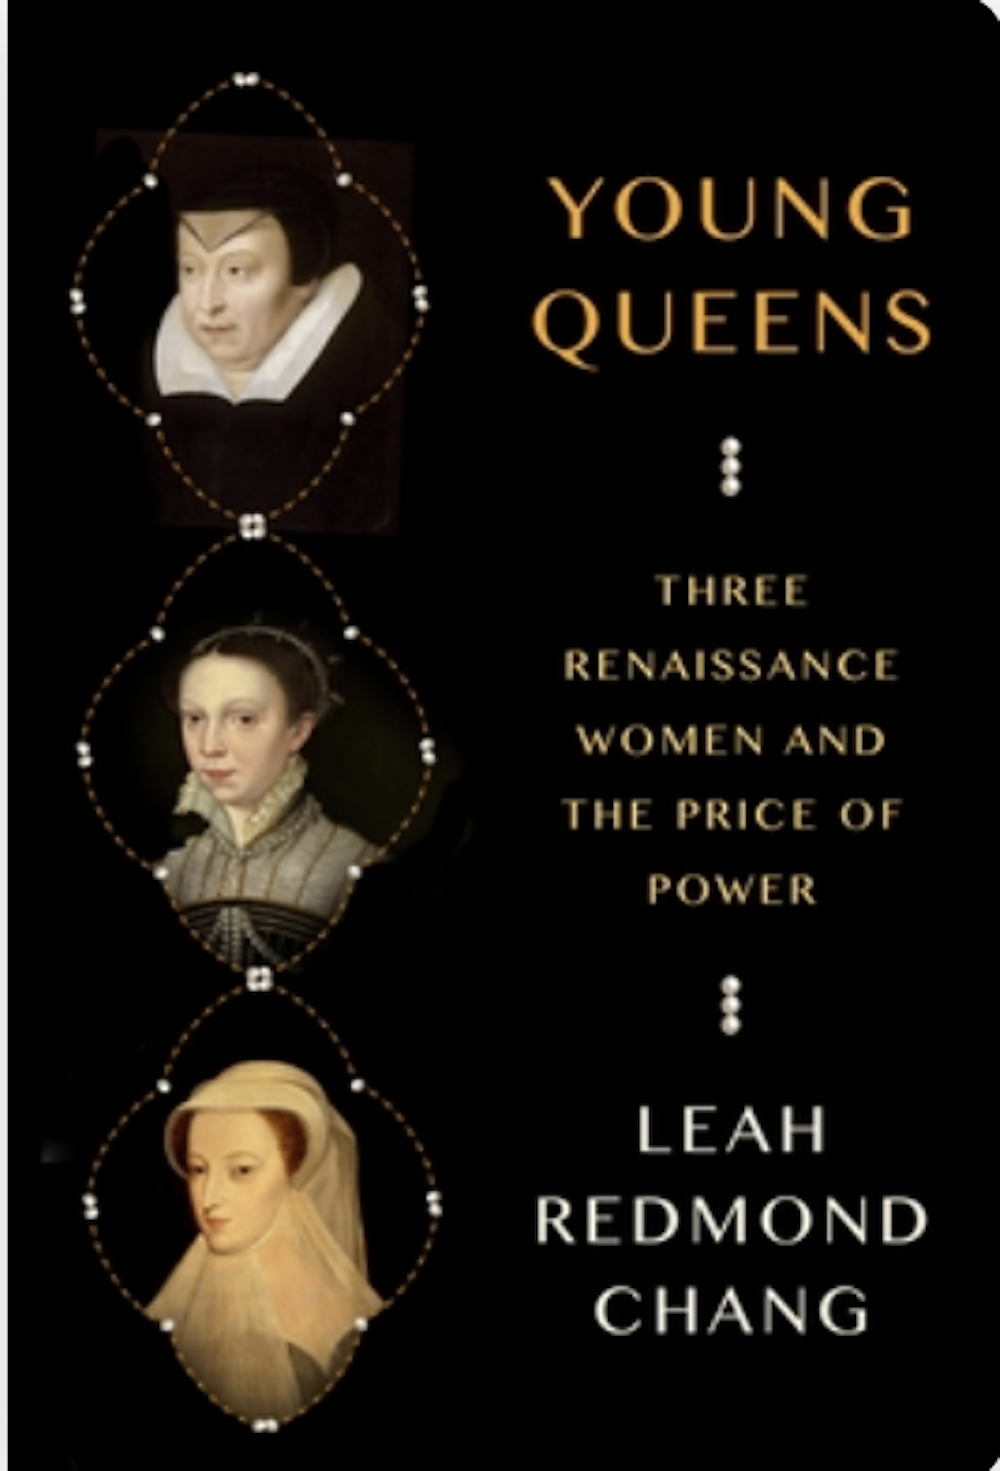 Decadence and trauma: delving into the emotional and political lives of  three young Renaissance queens